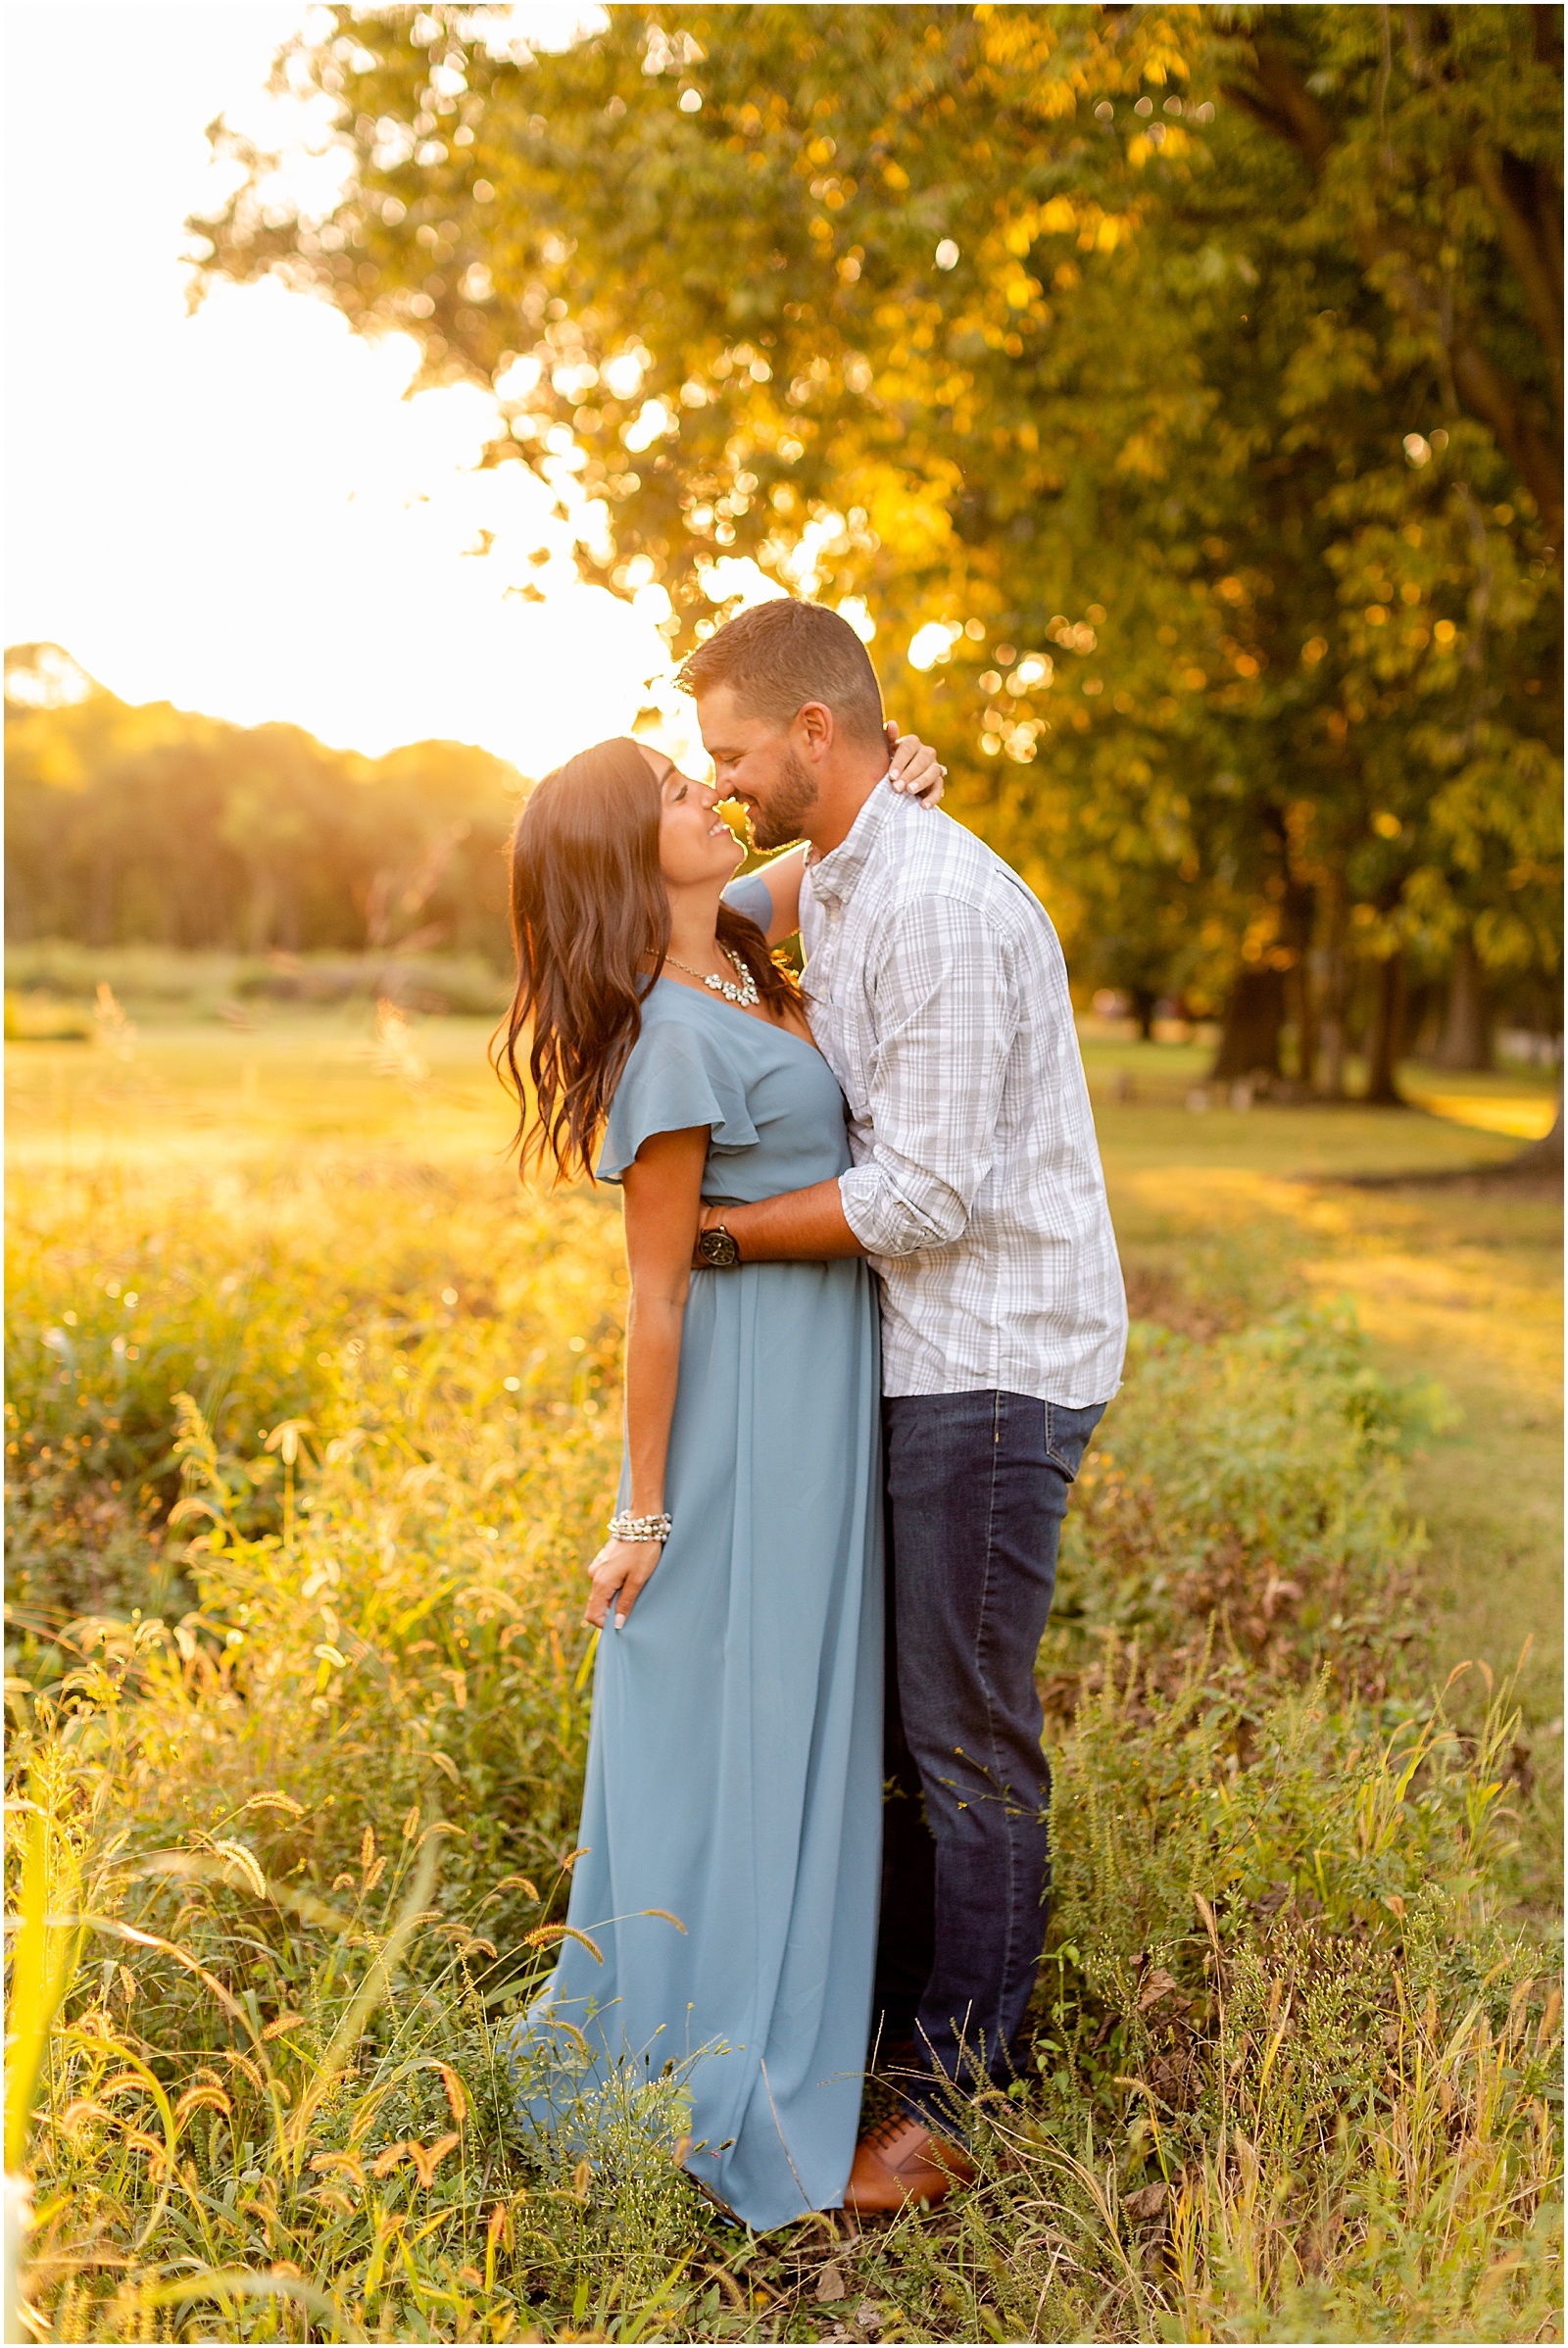 Sally and Andrew's Anniversary Session in New Harmony |Bret and Brandie Photography0015.jpg